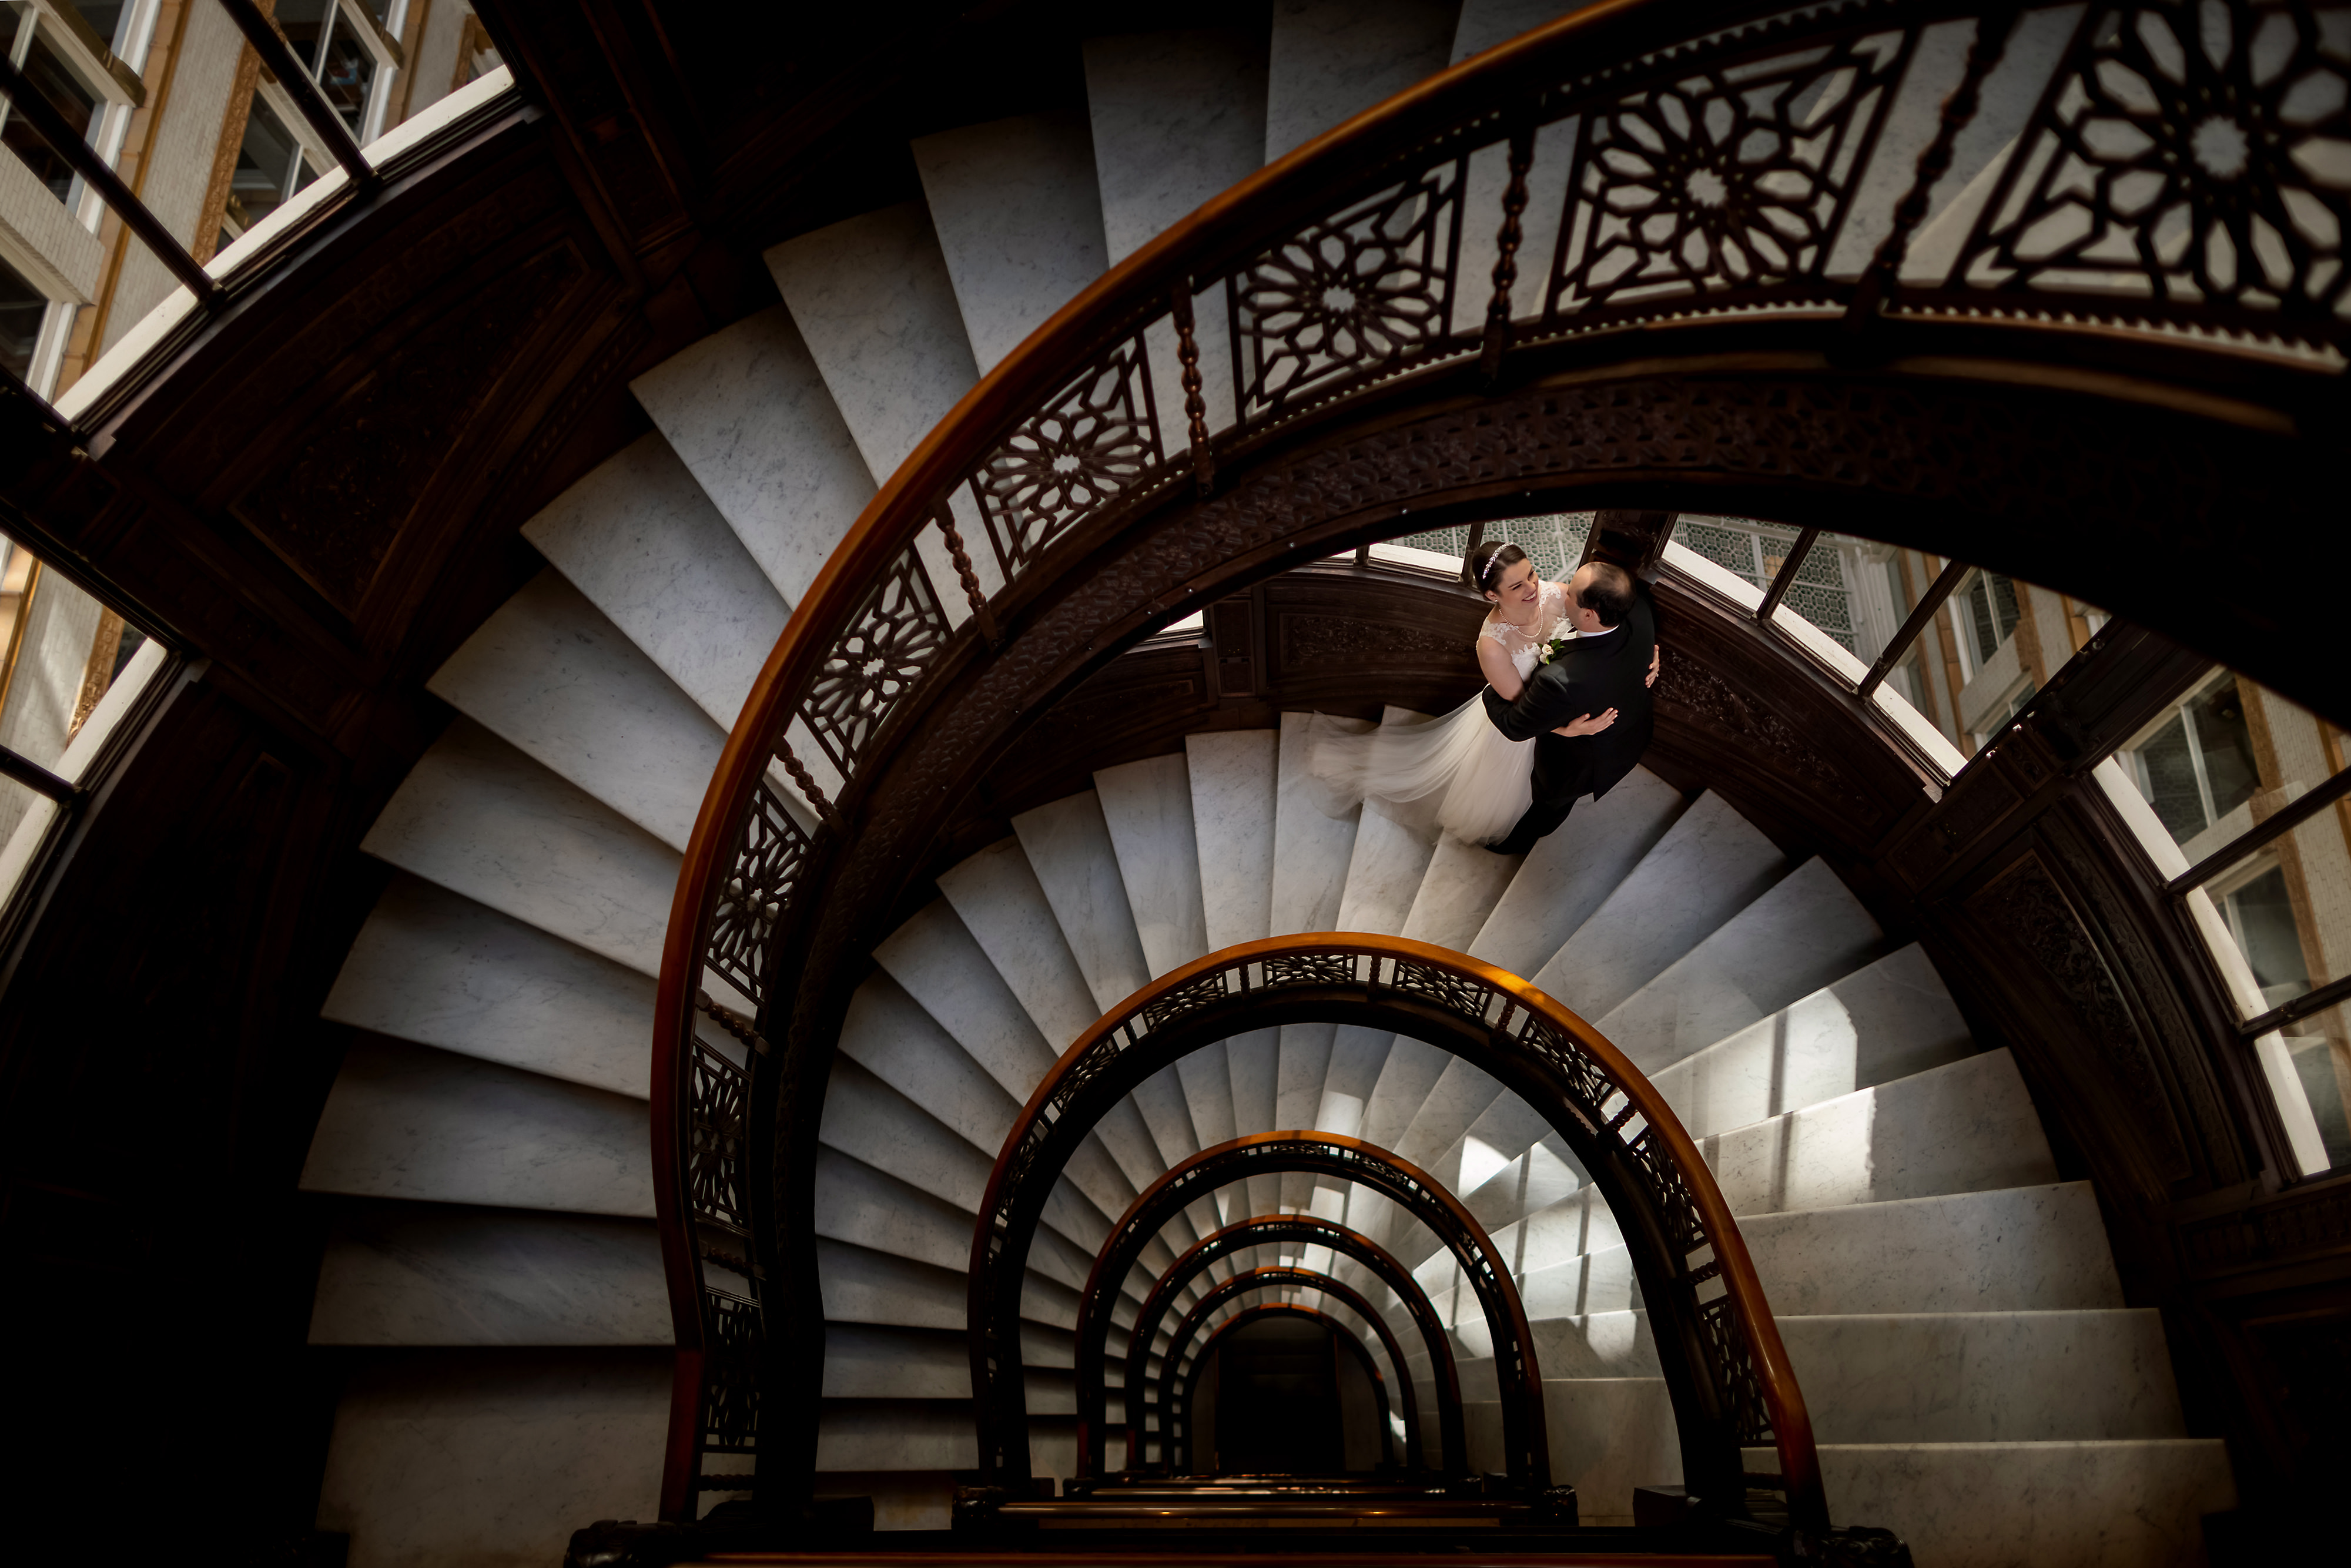 Bride and groom pose for portrait on the historic spiral staircase at the Rookery Building in downtown Chicago